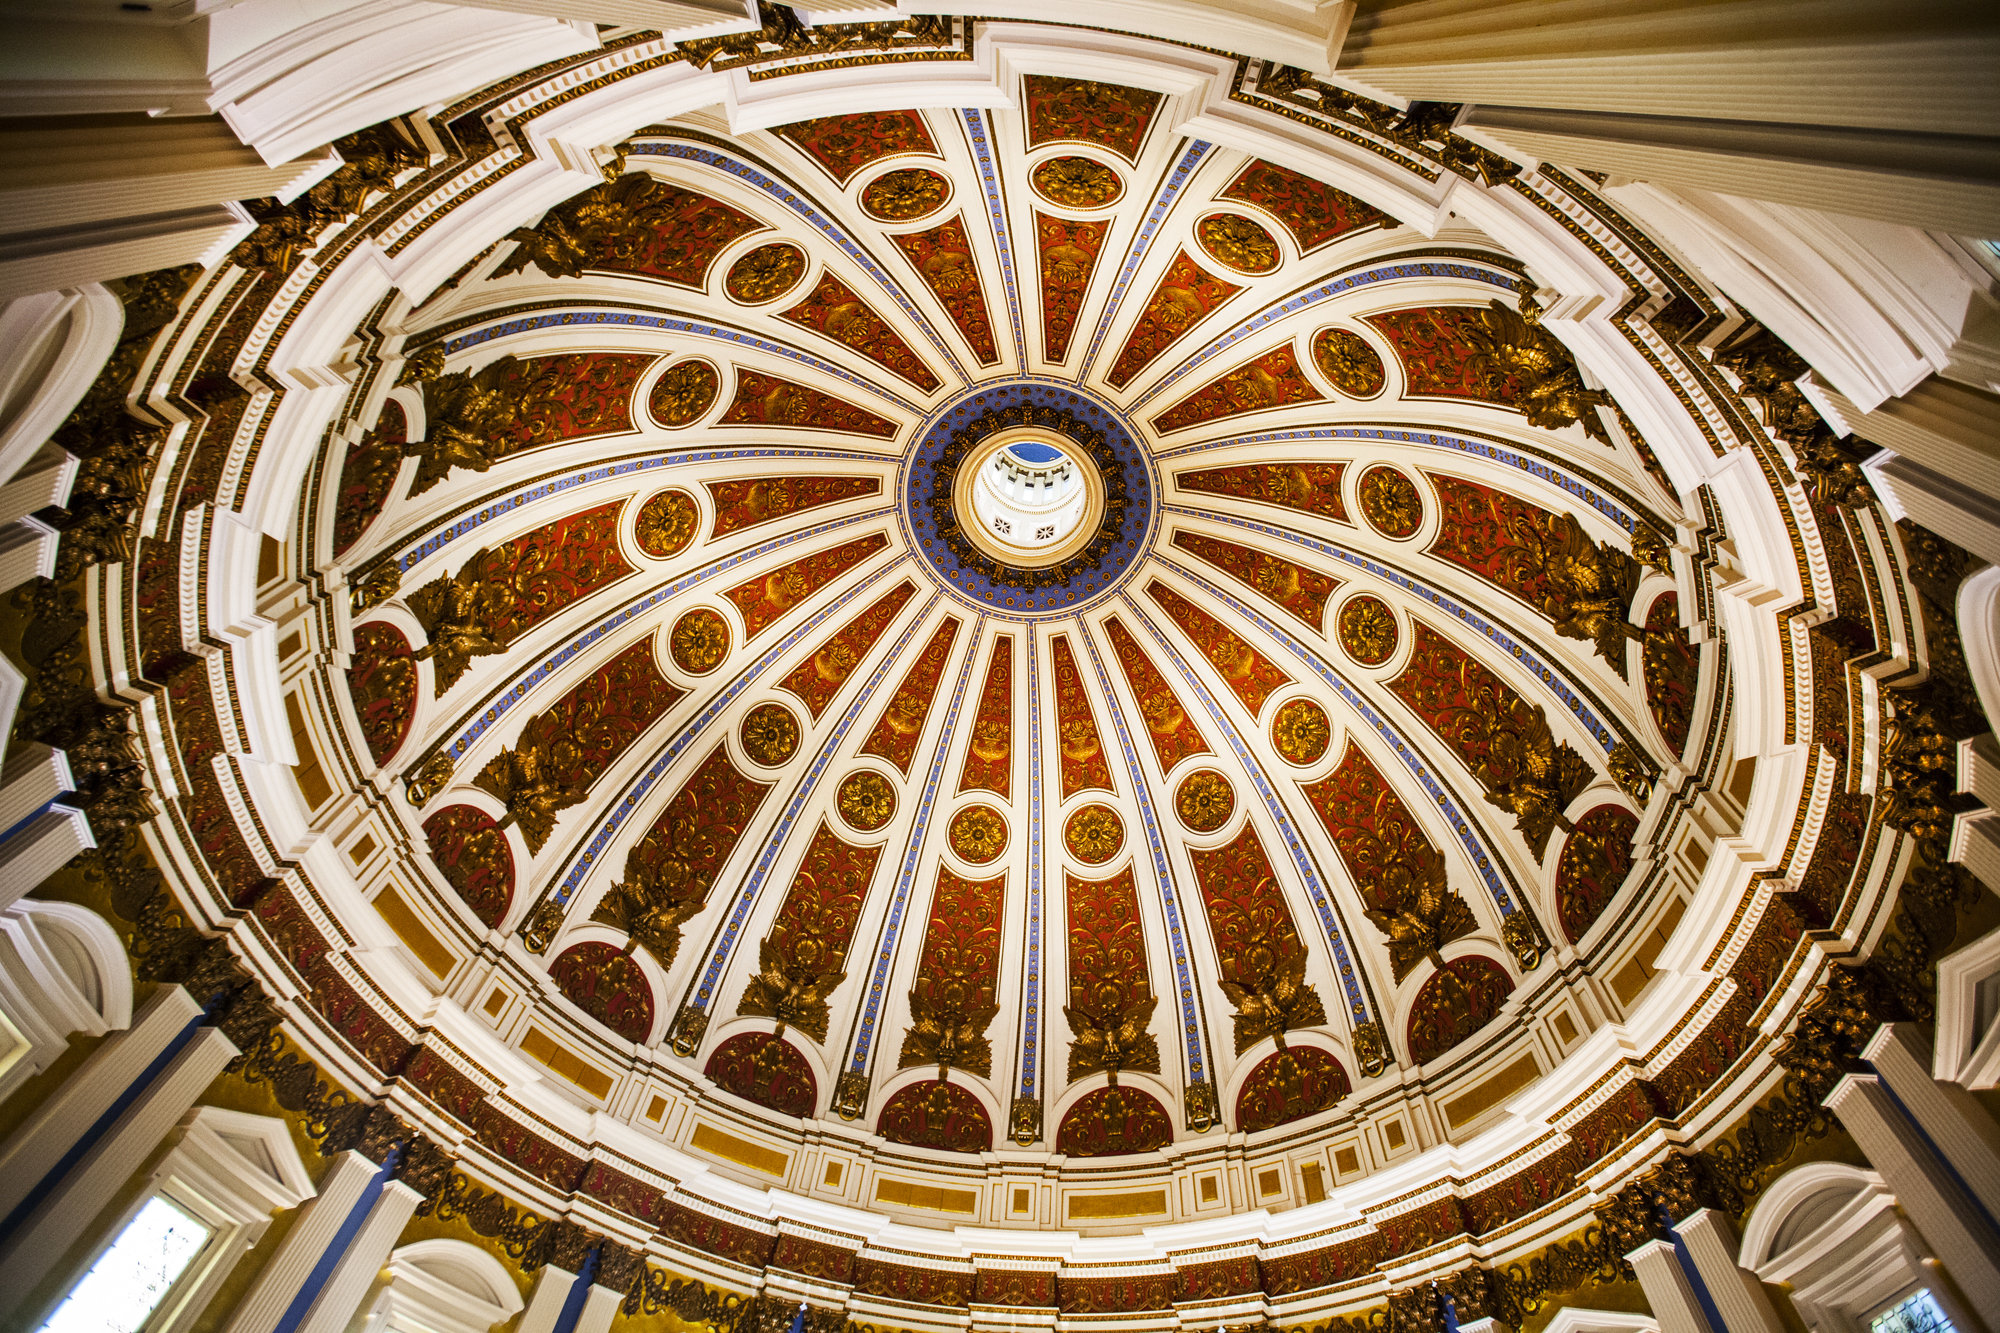 a-look-at-the-capitol-dome-inside-and-out--a1e6f8ff6b3f3f52.jpg